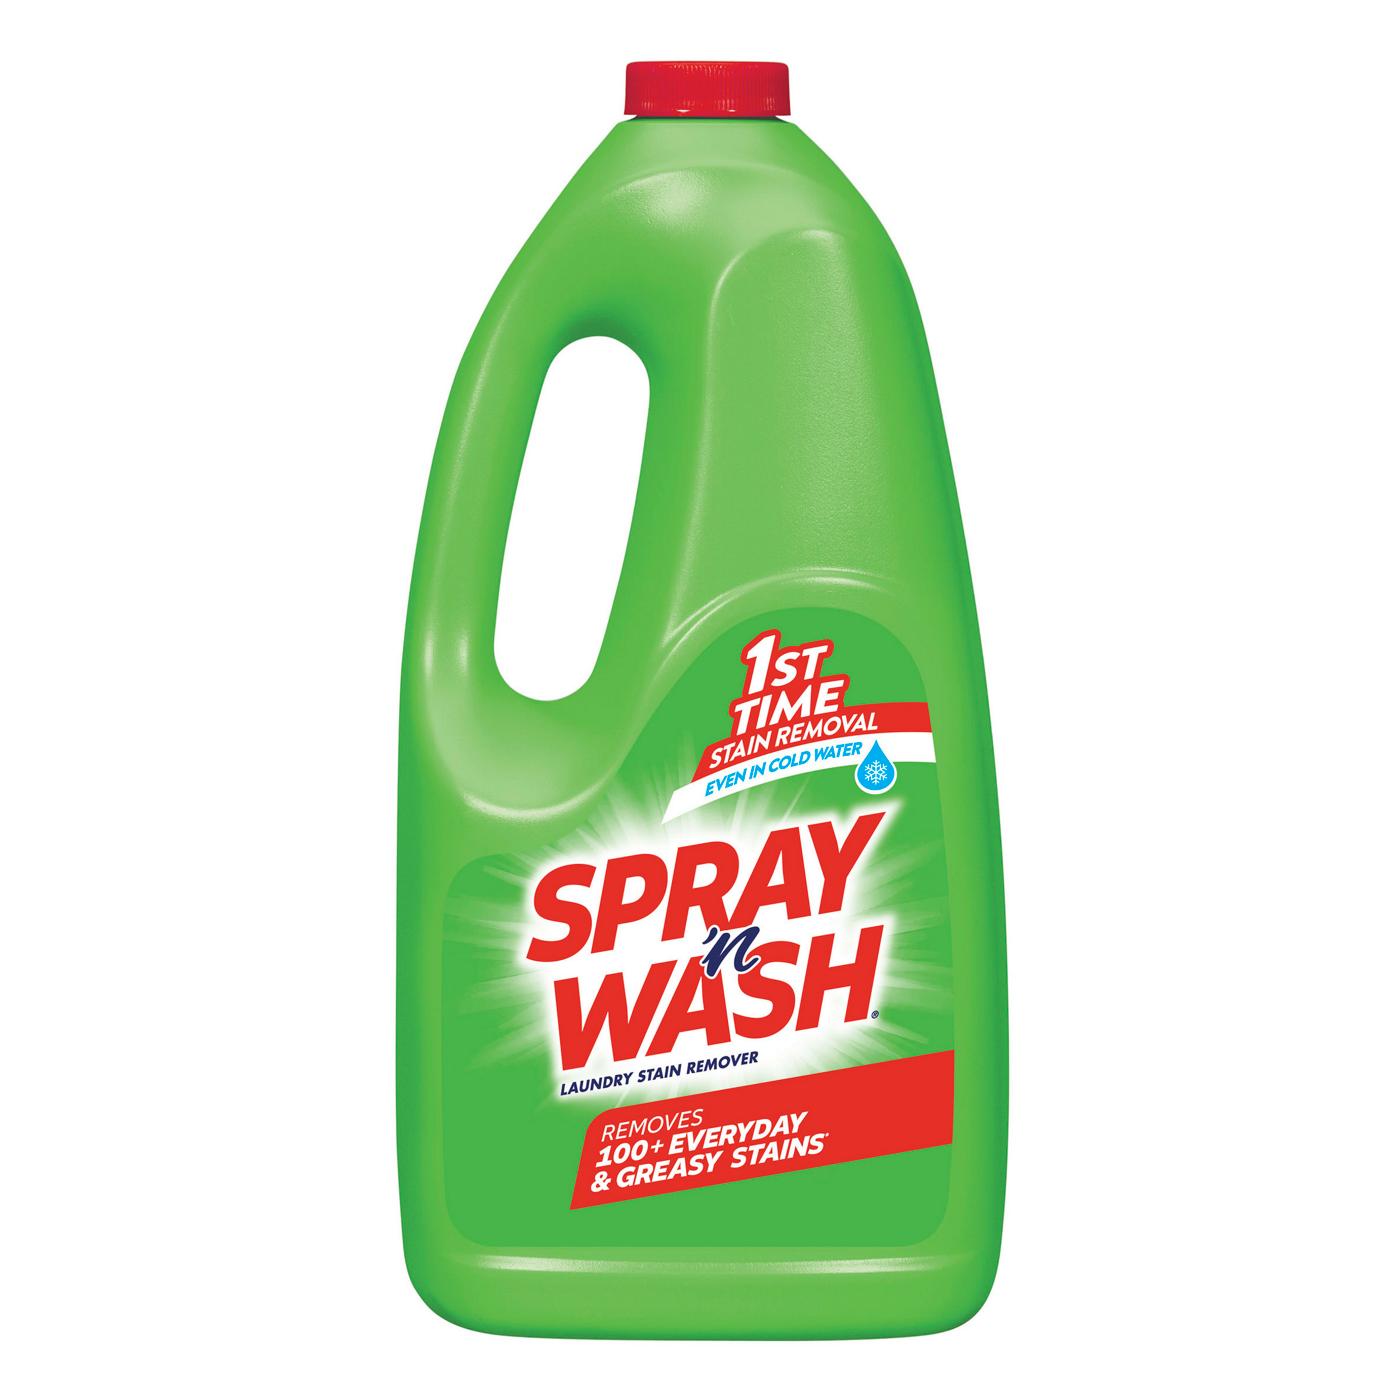 Spray 'n Wash Laundry Stain Remover; image 1 of 8